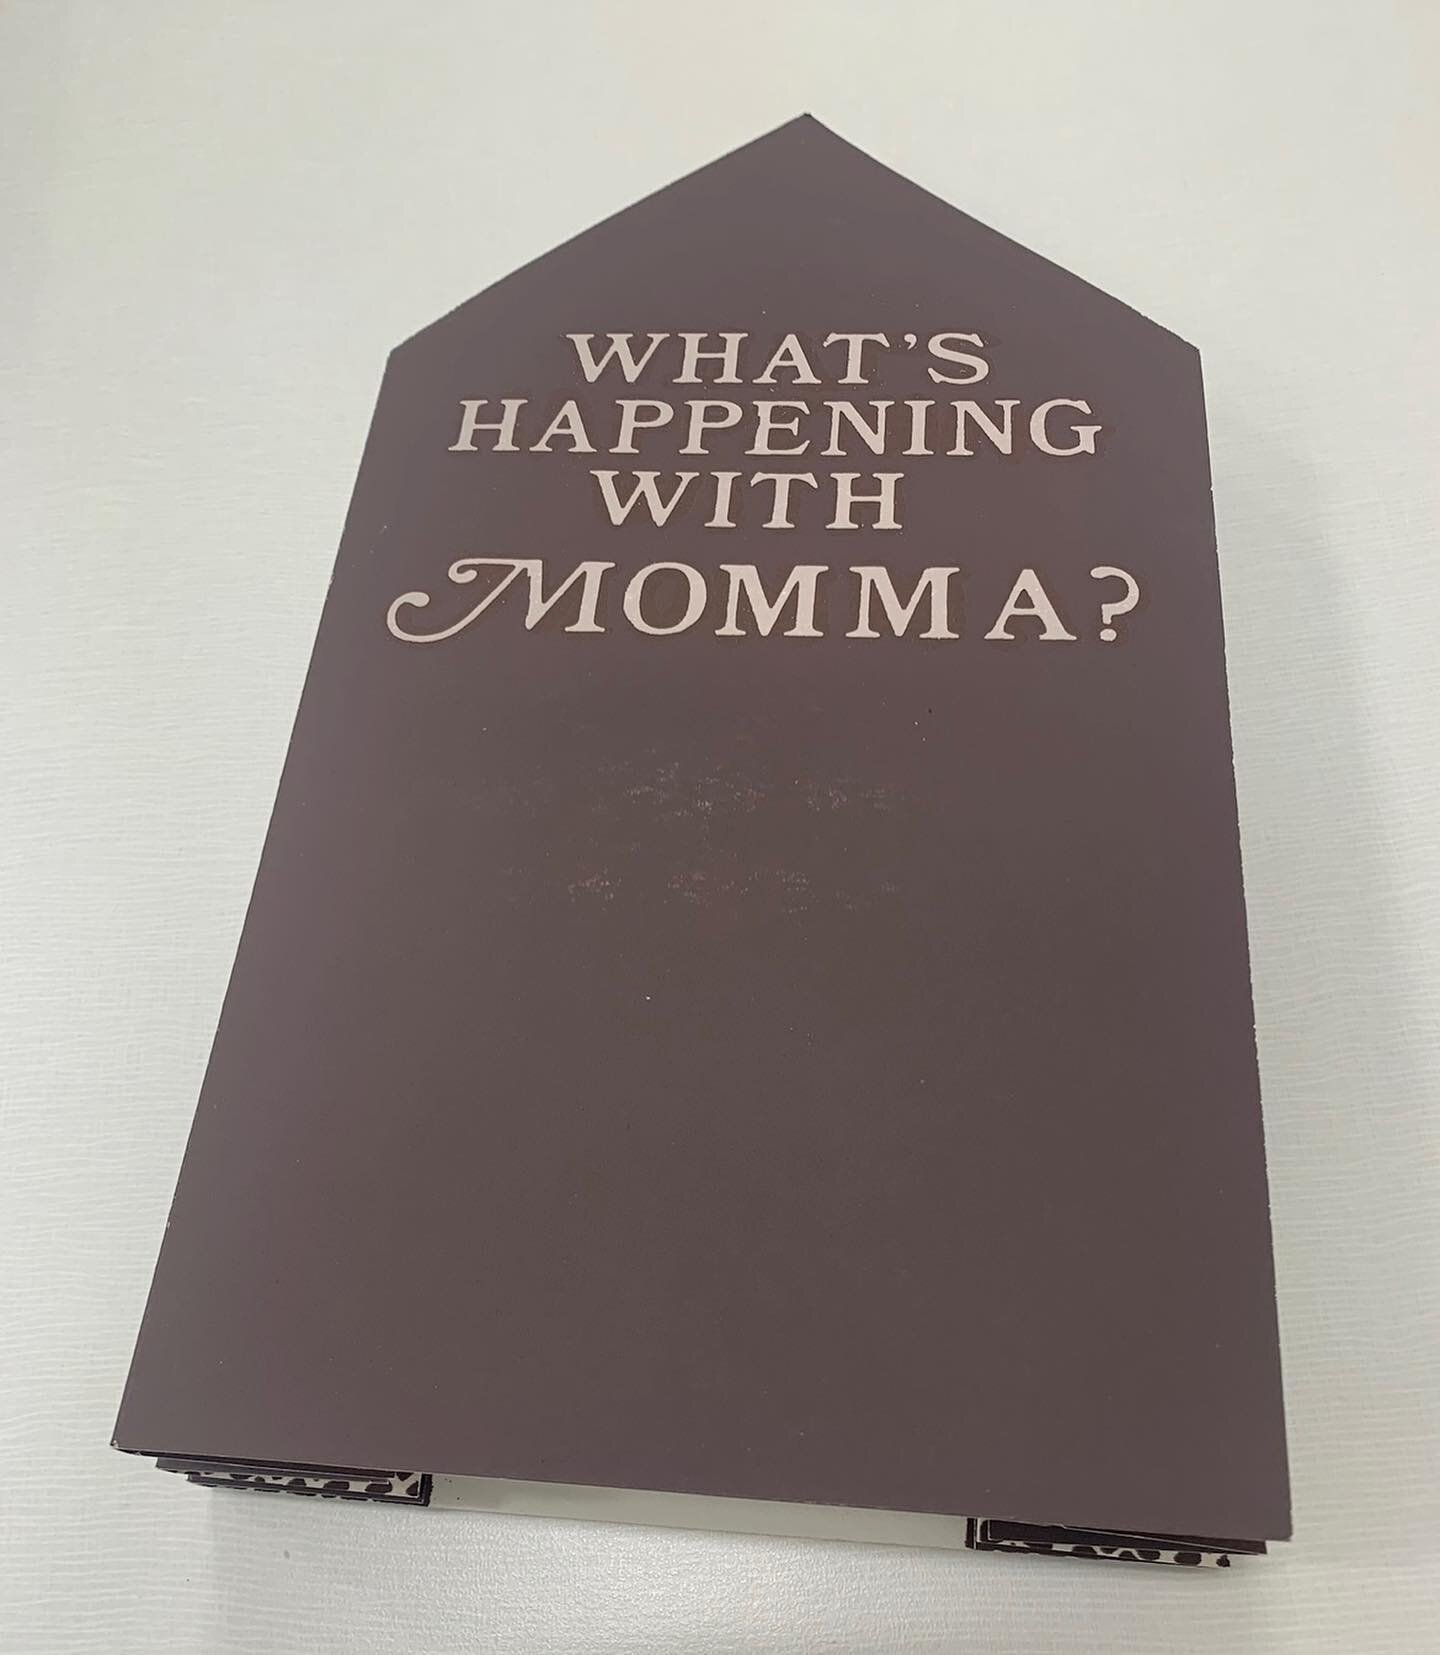 There is still time to visit the Herman B Wells Library and see this amazing artists&rsquo; book by Clarissa T. Sligh

What's Happening with Momma?, 1988
Women's Studio Workshop, Rosendale, N.Y.
11&Prime; x 36&Prime; artist&rsquo;s book. 
Silk-screen